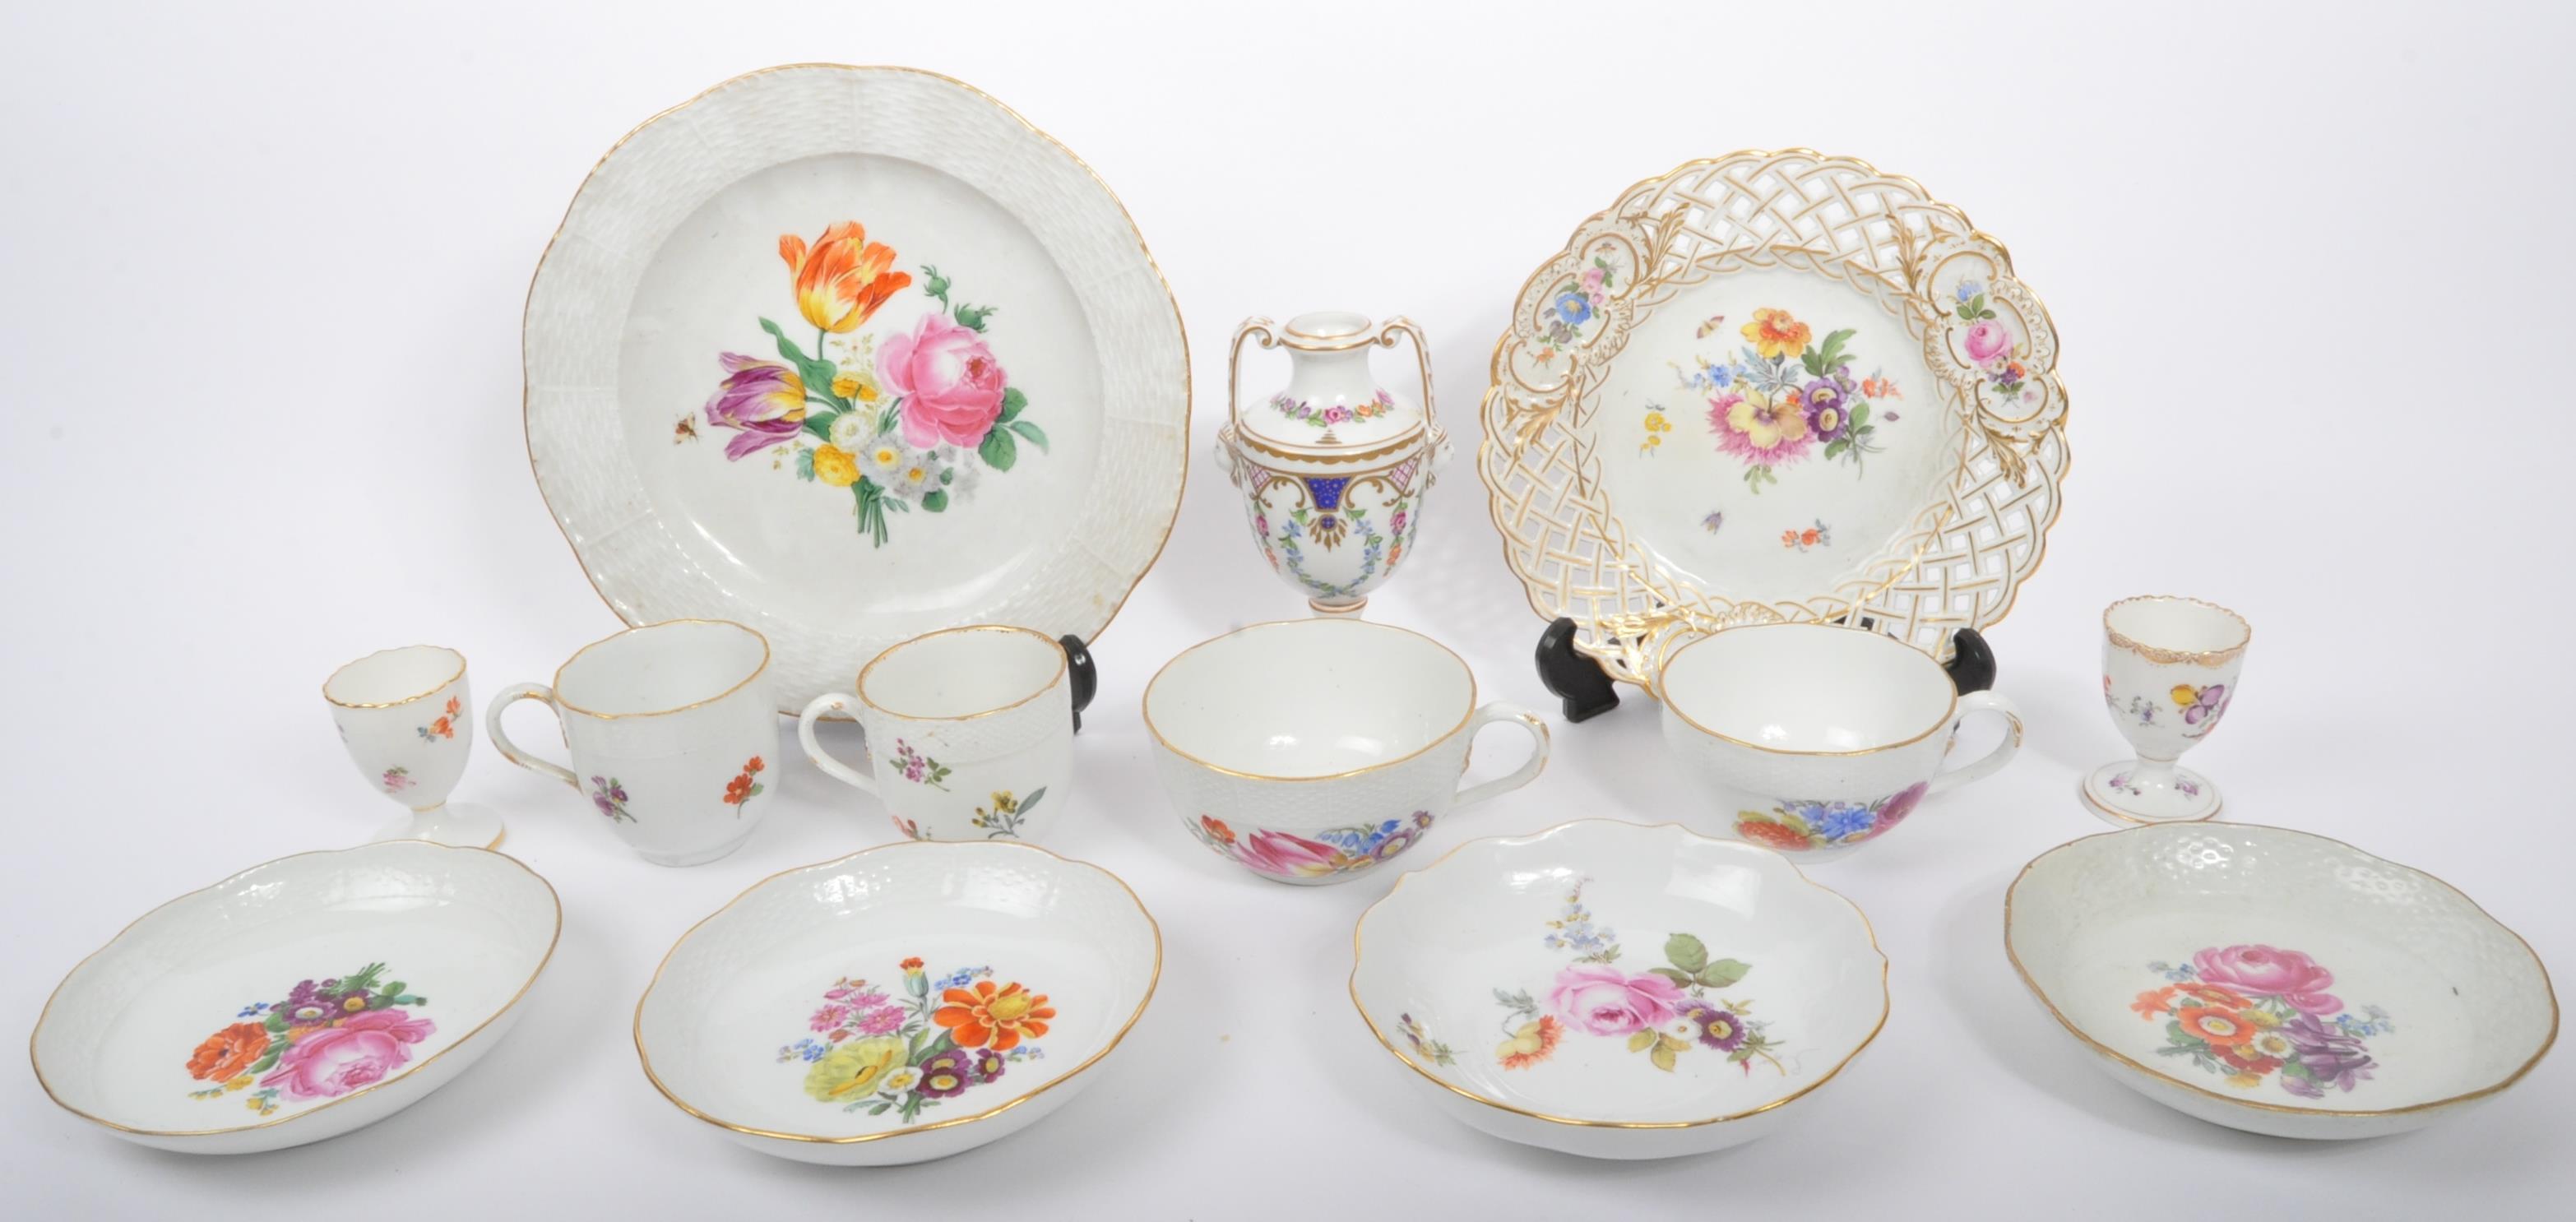 COLLECTION OF 19TH CENTURY & LATER MEISSEN PORCELAIN ITEMS